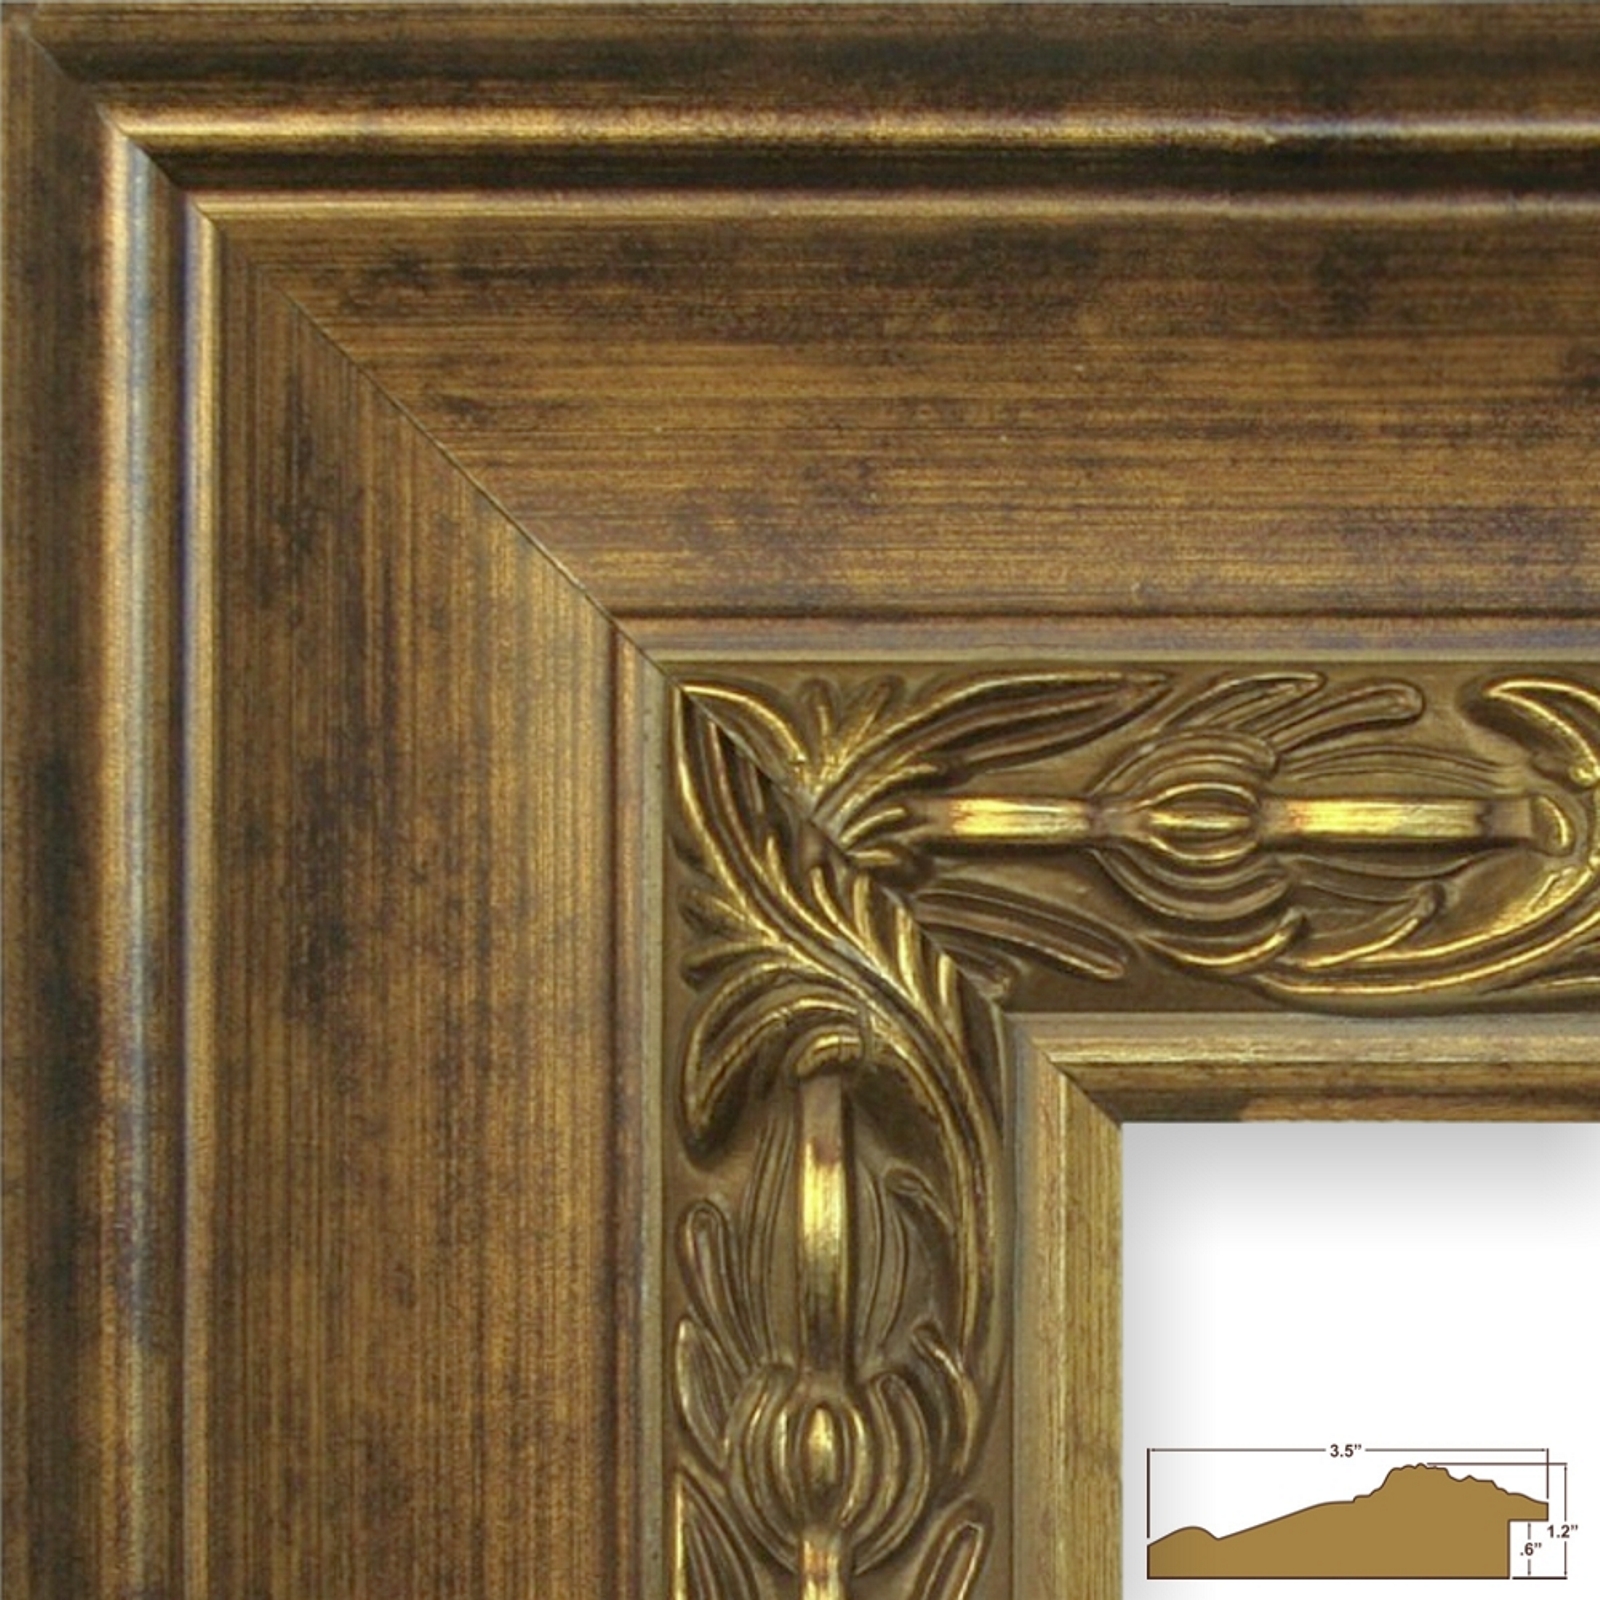 Gotham Ornate Solid Wood Picture Frame (91/92)